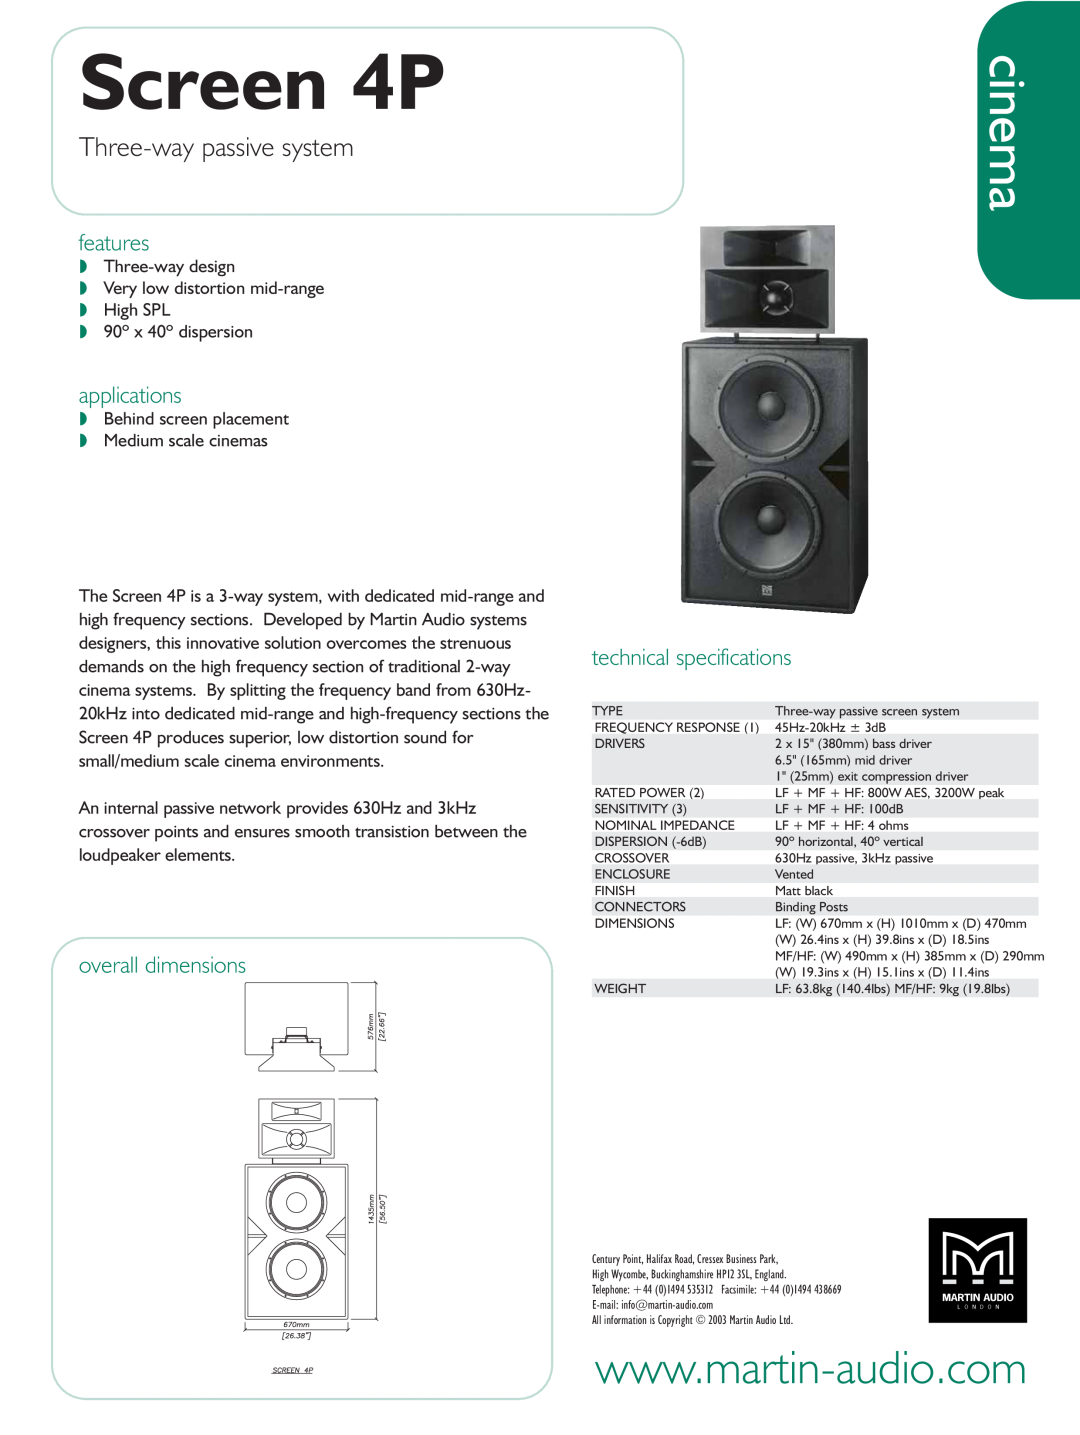 Martin Audio Screen 4P technical specifications cinema, Three-waypassive system, features, applications 